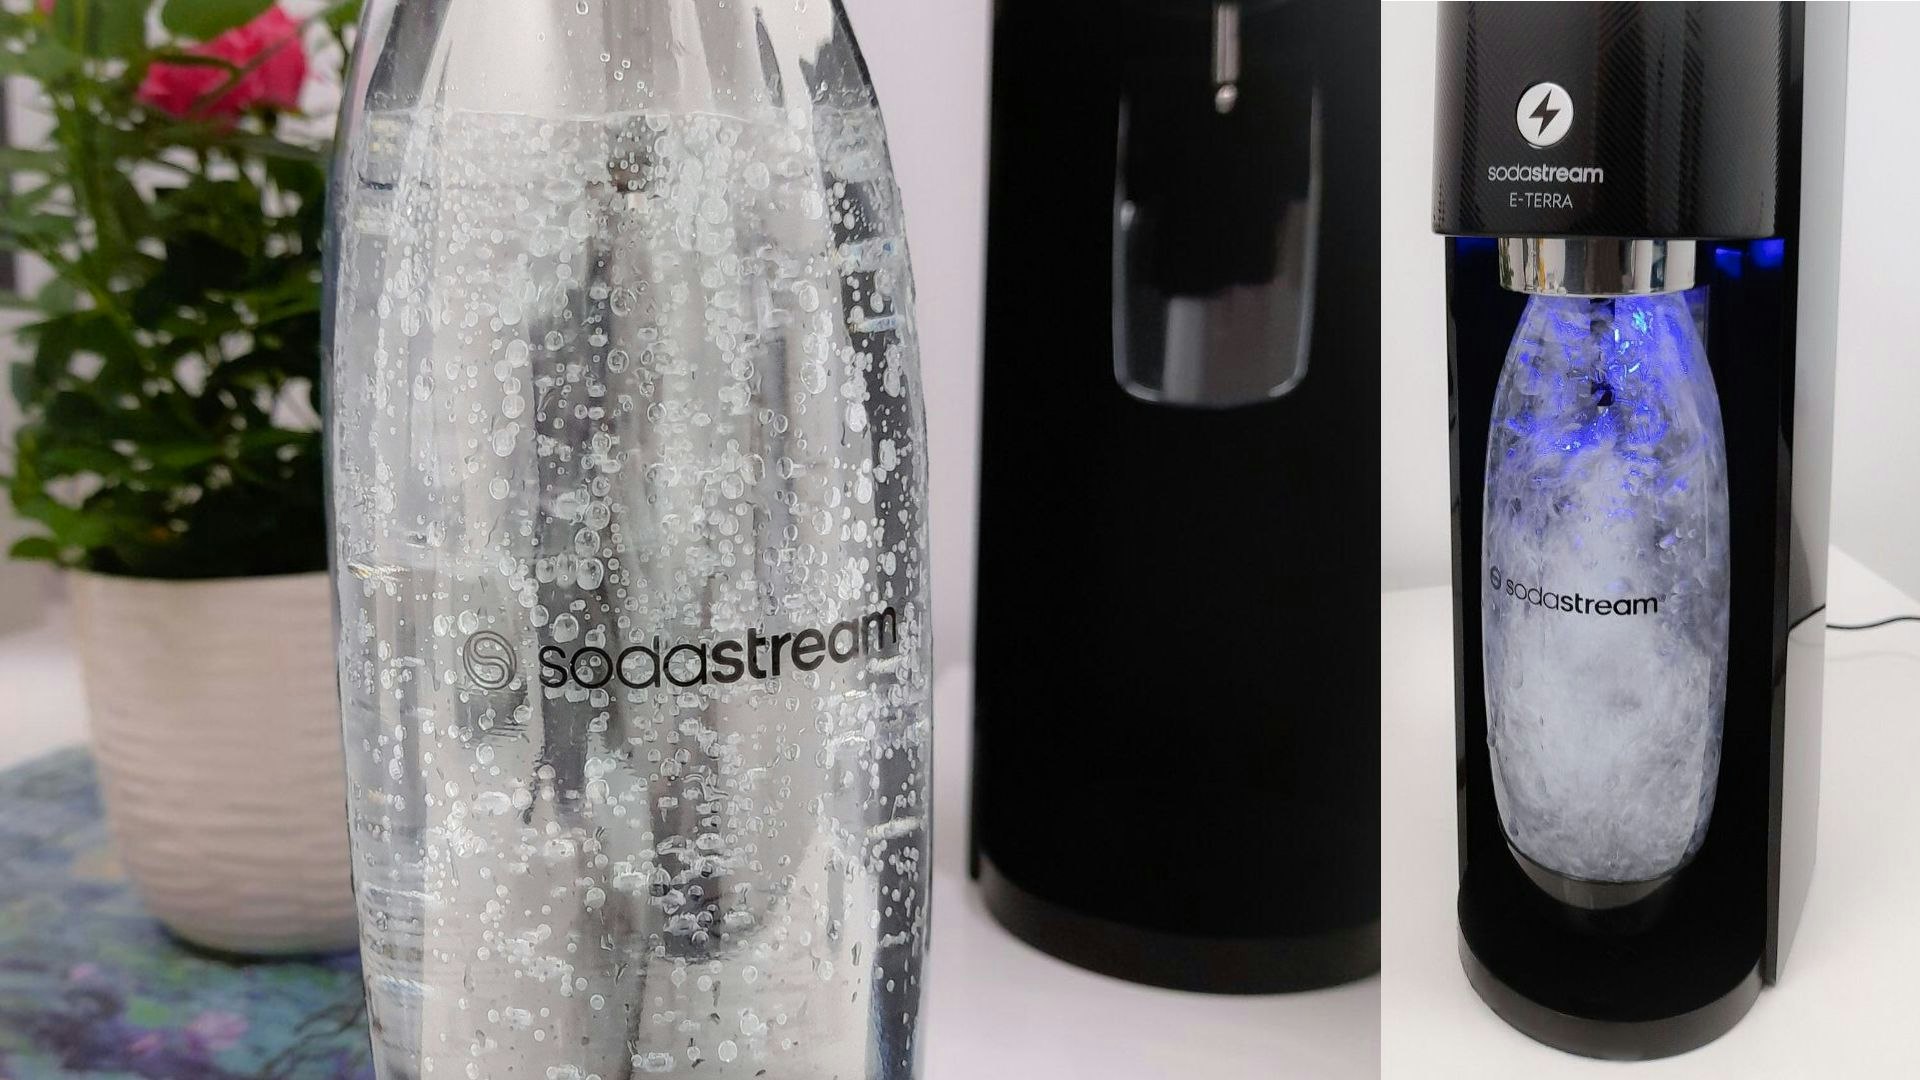 Reviews for SodaStream Terra Red Soda Machine and Sparkling Water Maker Kit